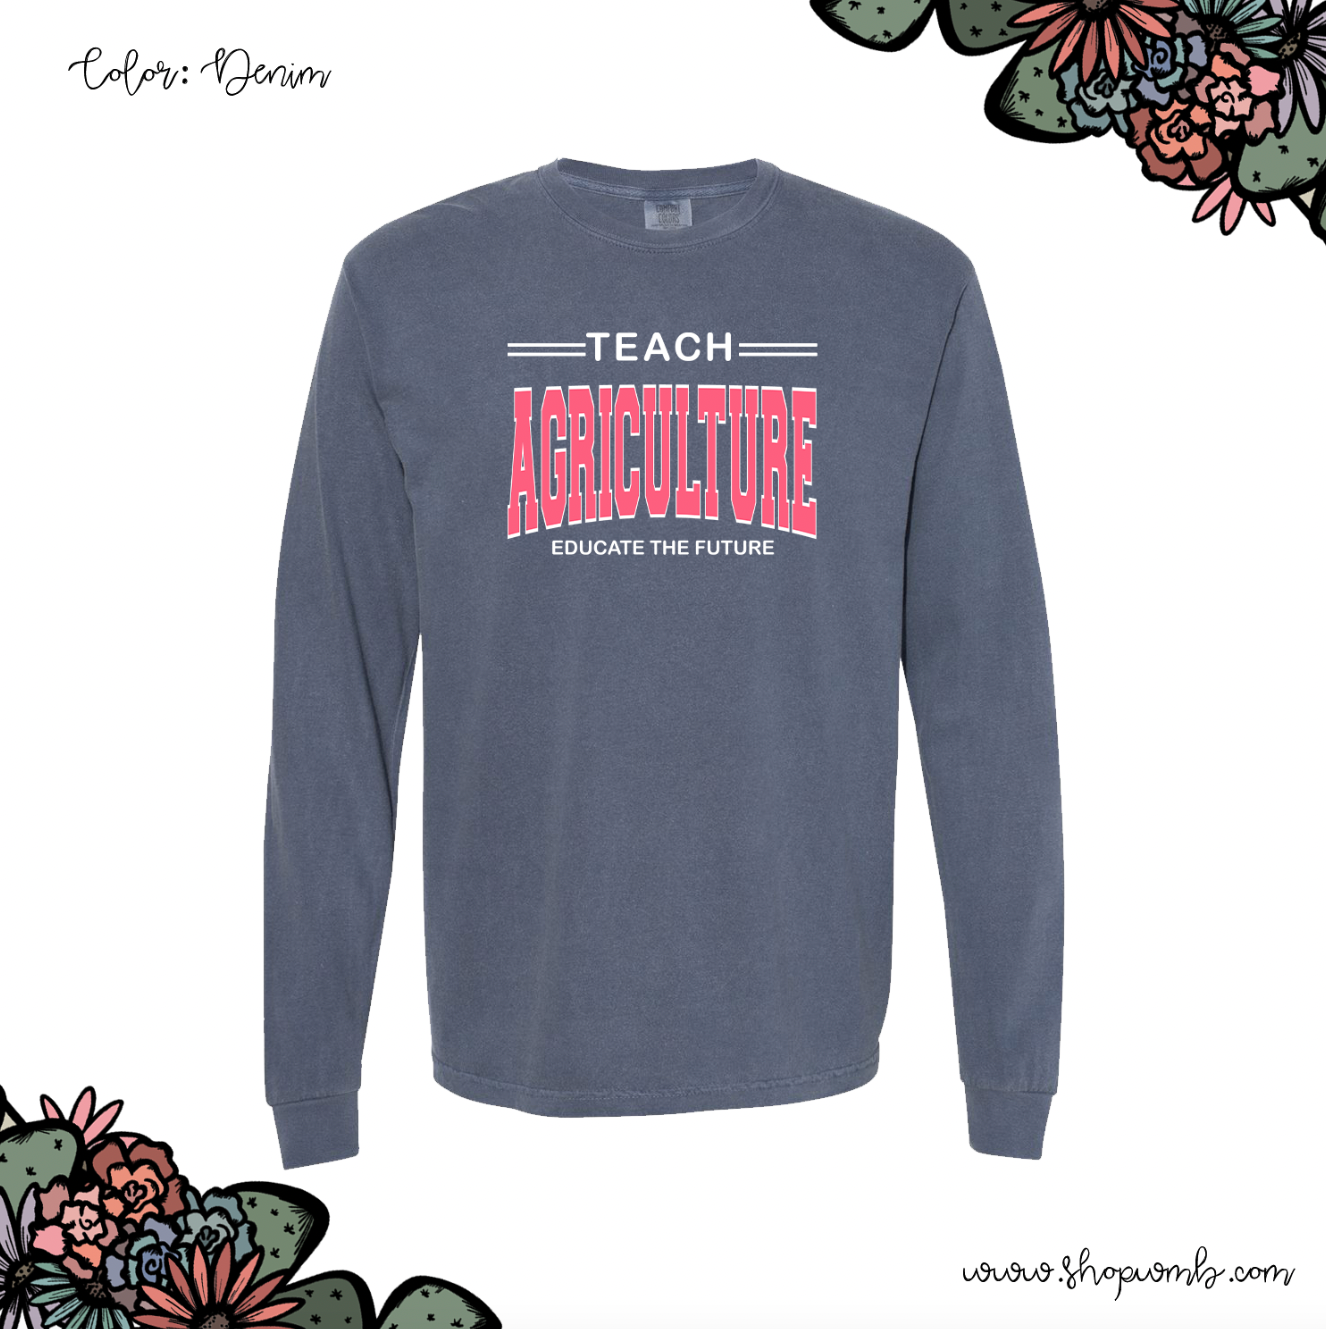 Teach Agriculture Educate The Future Pink LONG SLEEVE T-Shirt (S-3XL) - Multiple Colors!